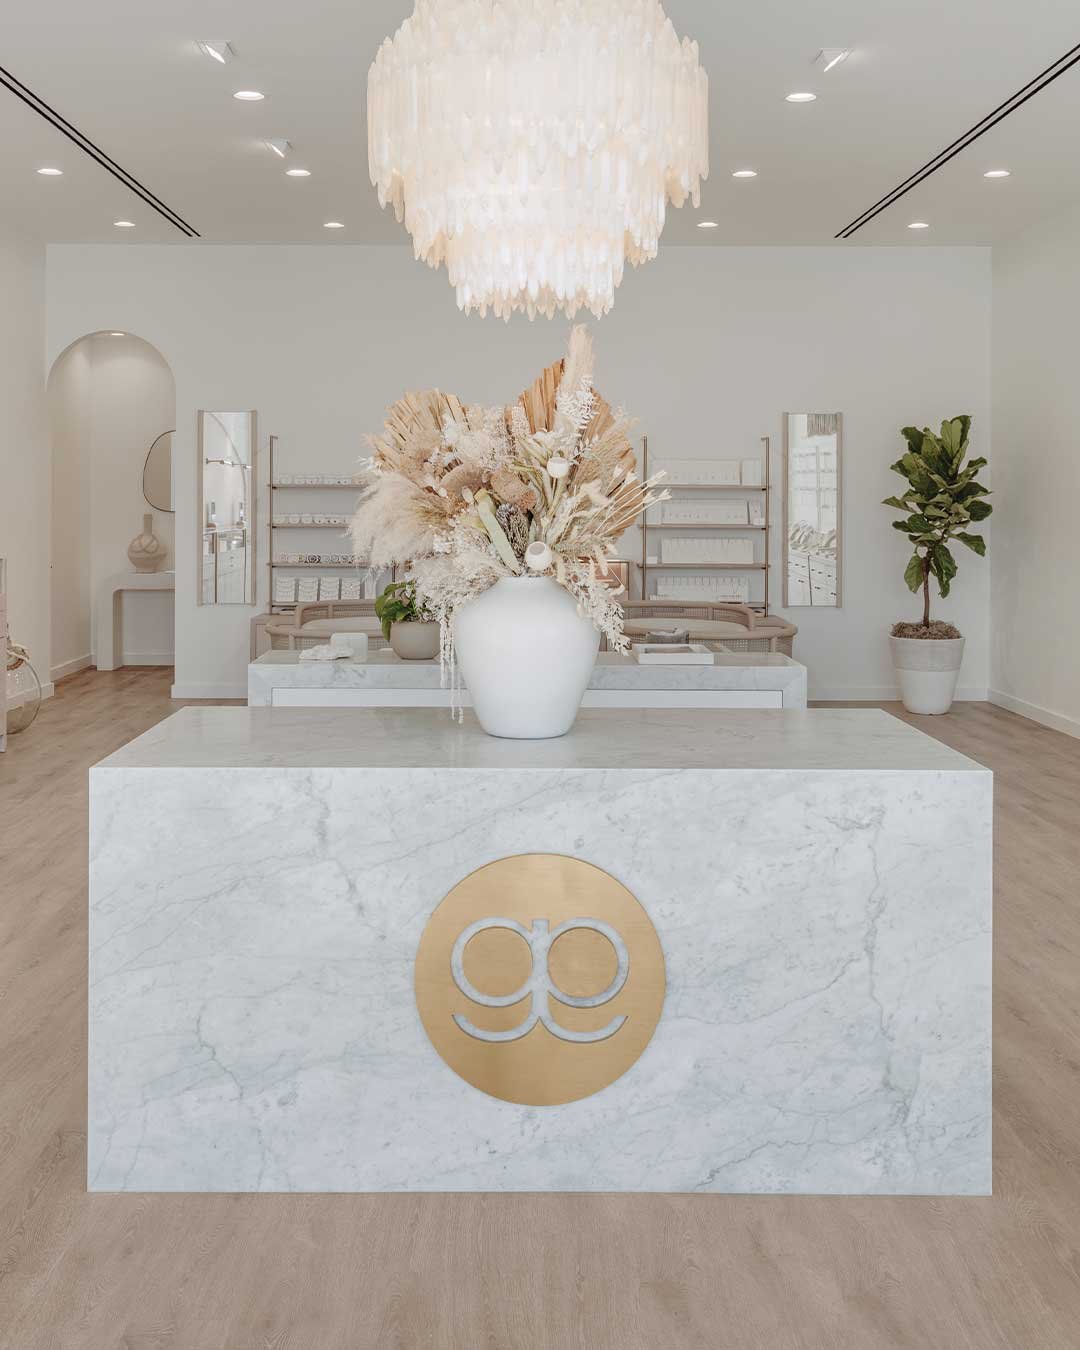 interior of gorjana store with marble counter with gorjana logo and big white chandelier